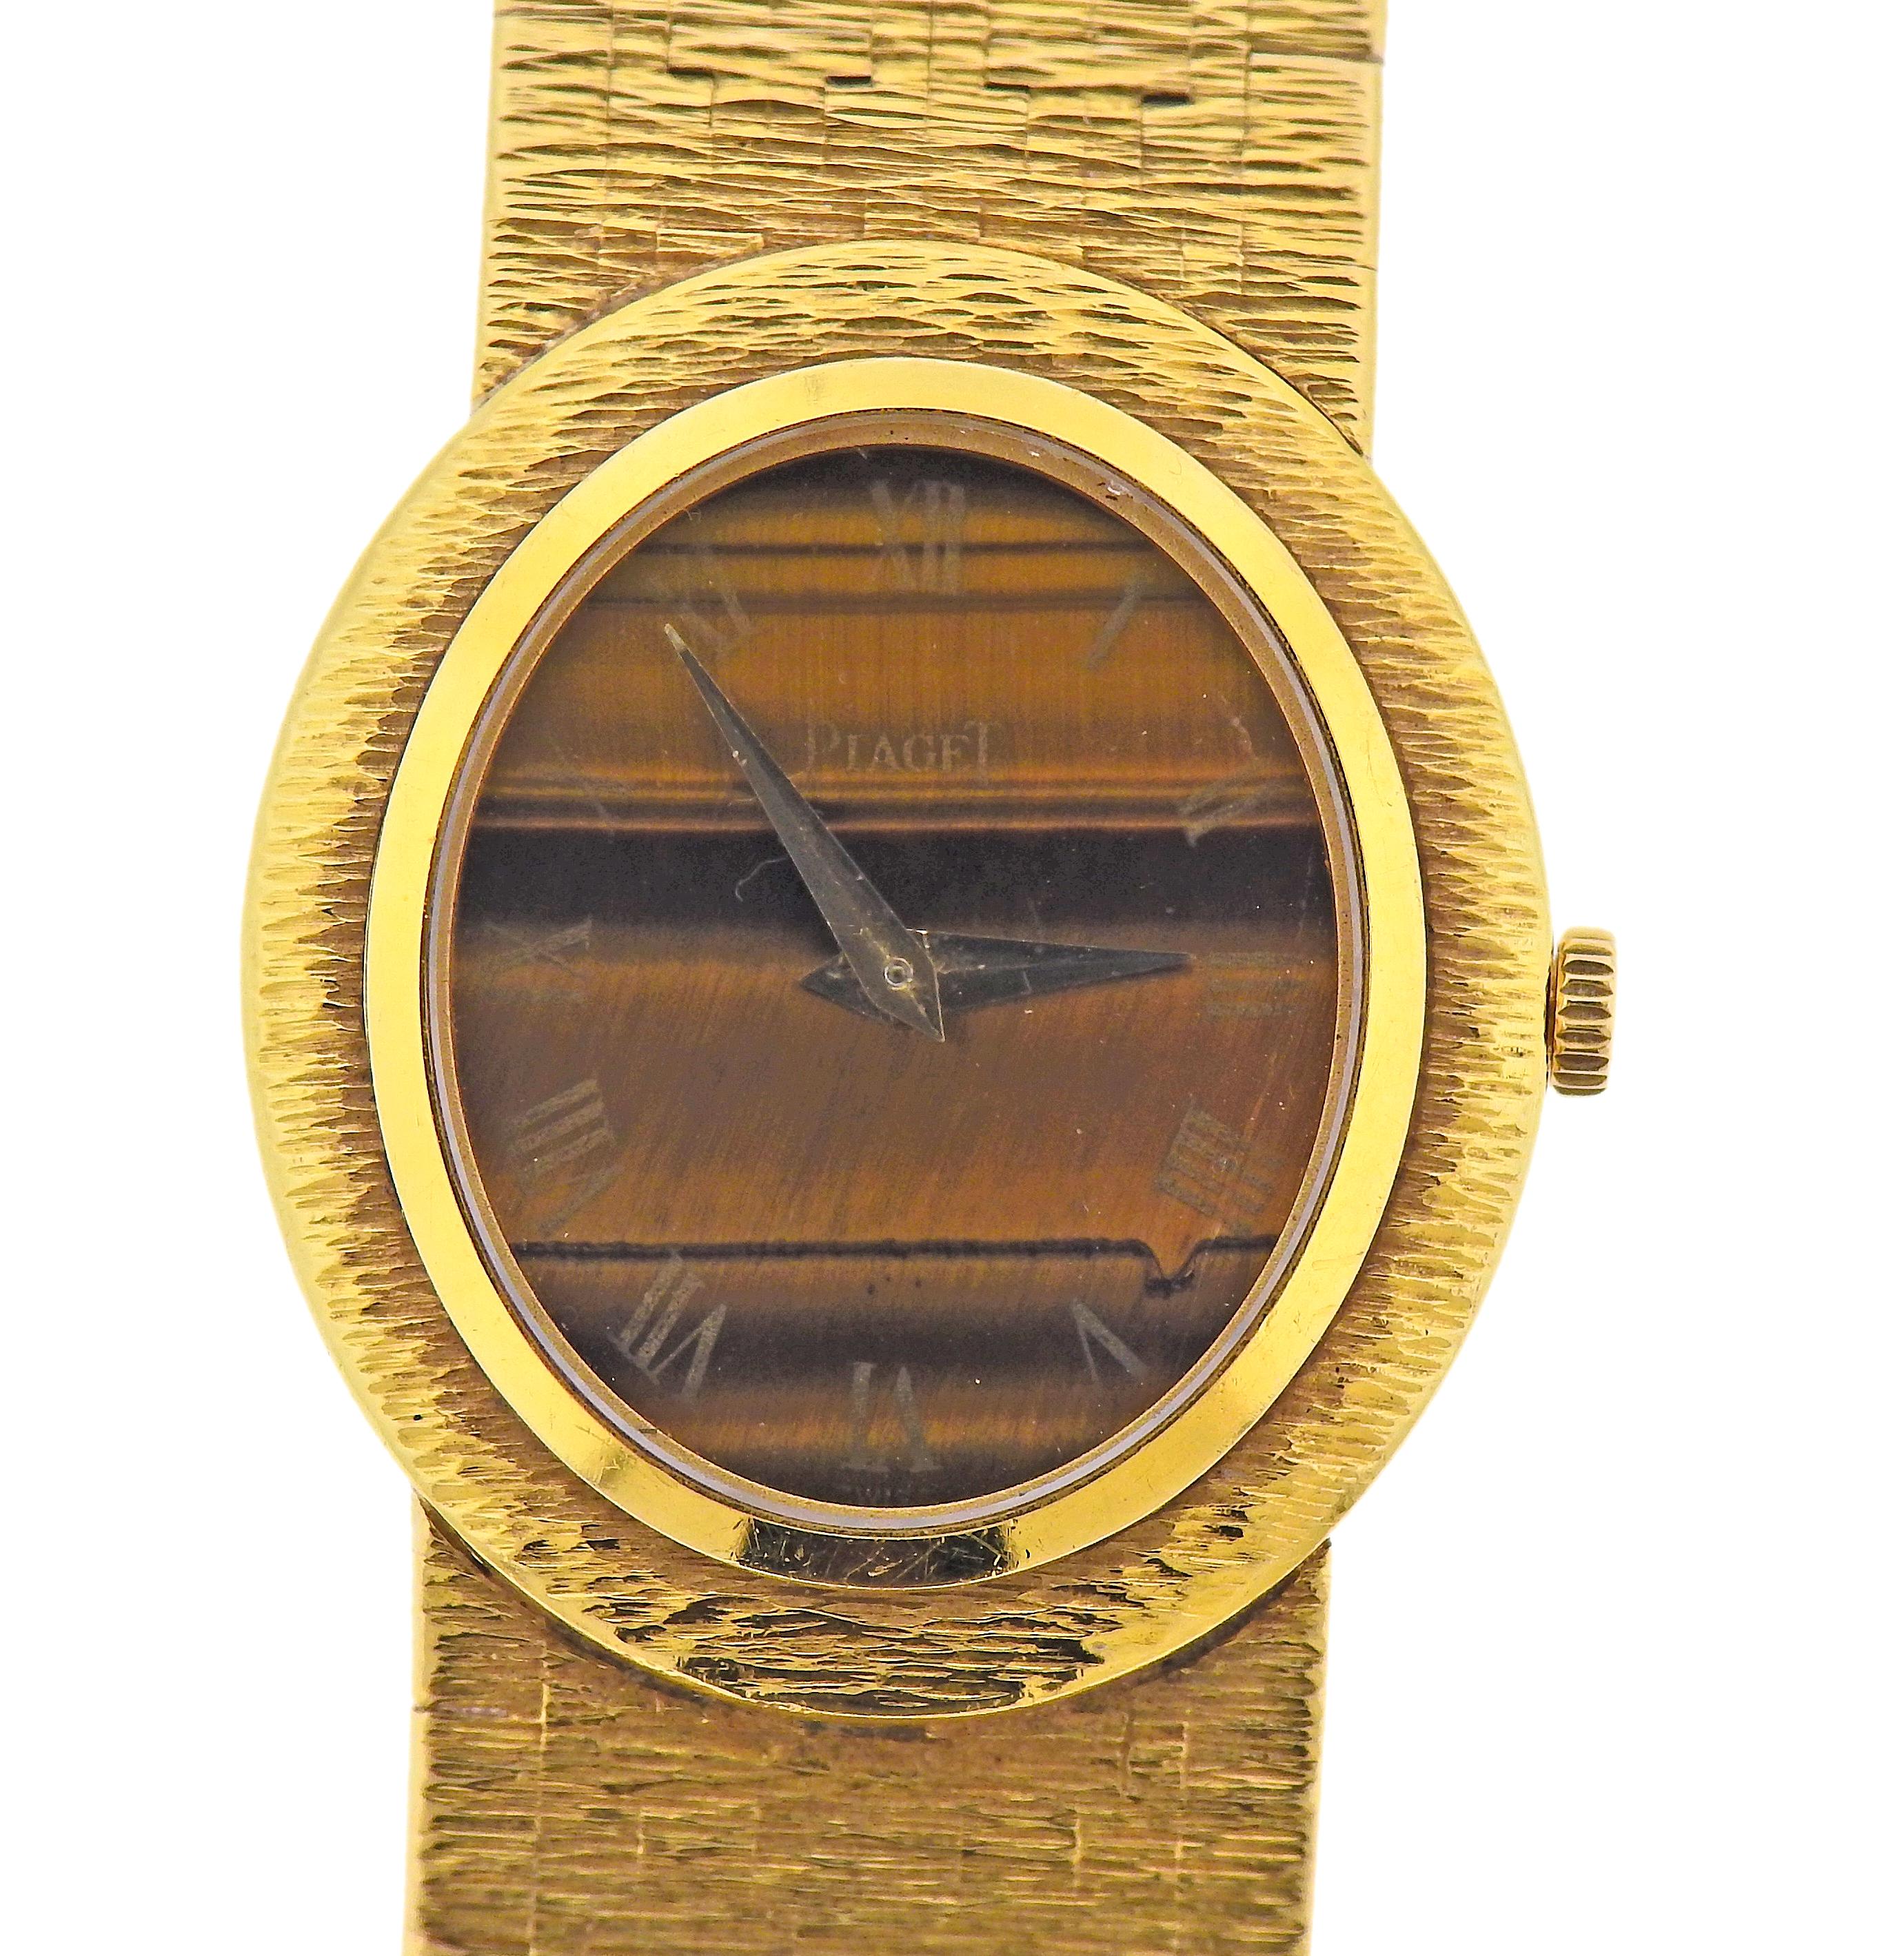 18k yellow gold Piaget watch, with oval case , featuring tiger's eye dial, Roman numeral markers. Case is 24mm excl. crown x 27mm. Bracelet is 6.25